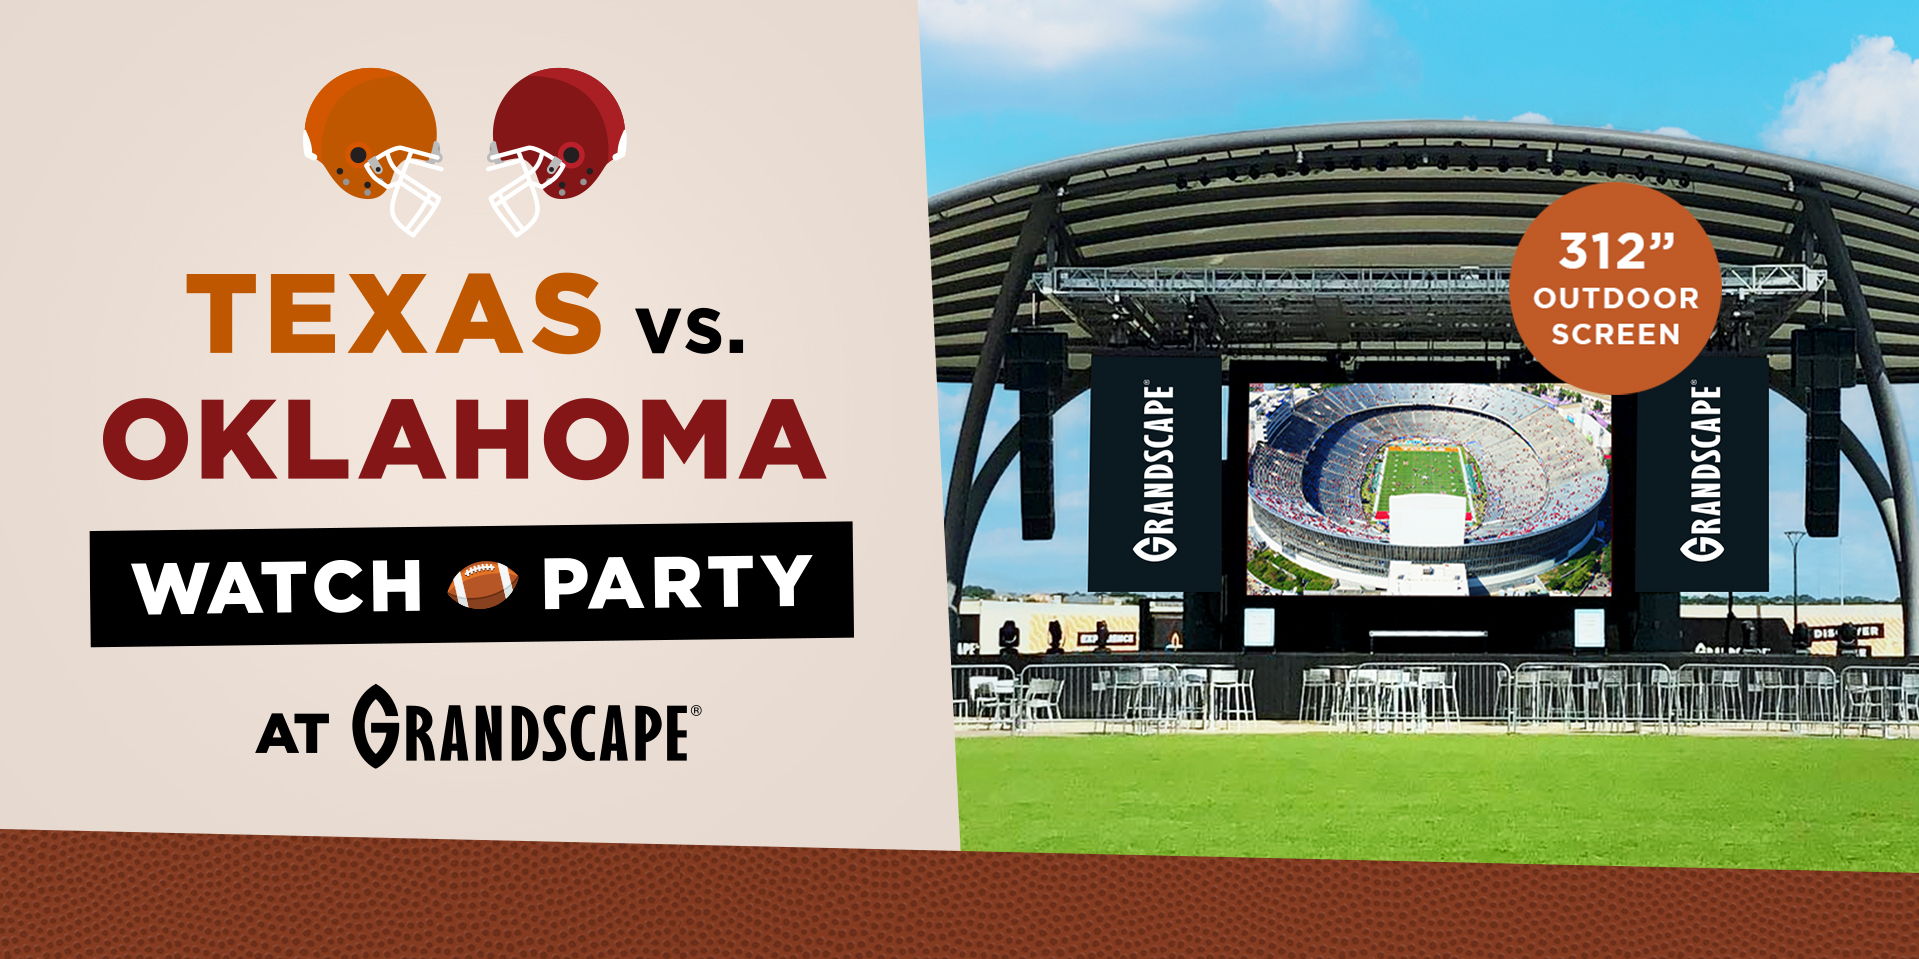 Texas vs. Oklahoma Watch Party promotional image